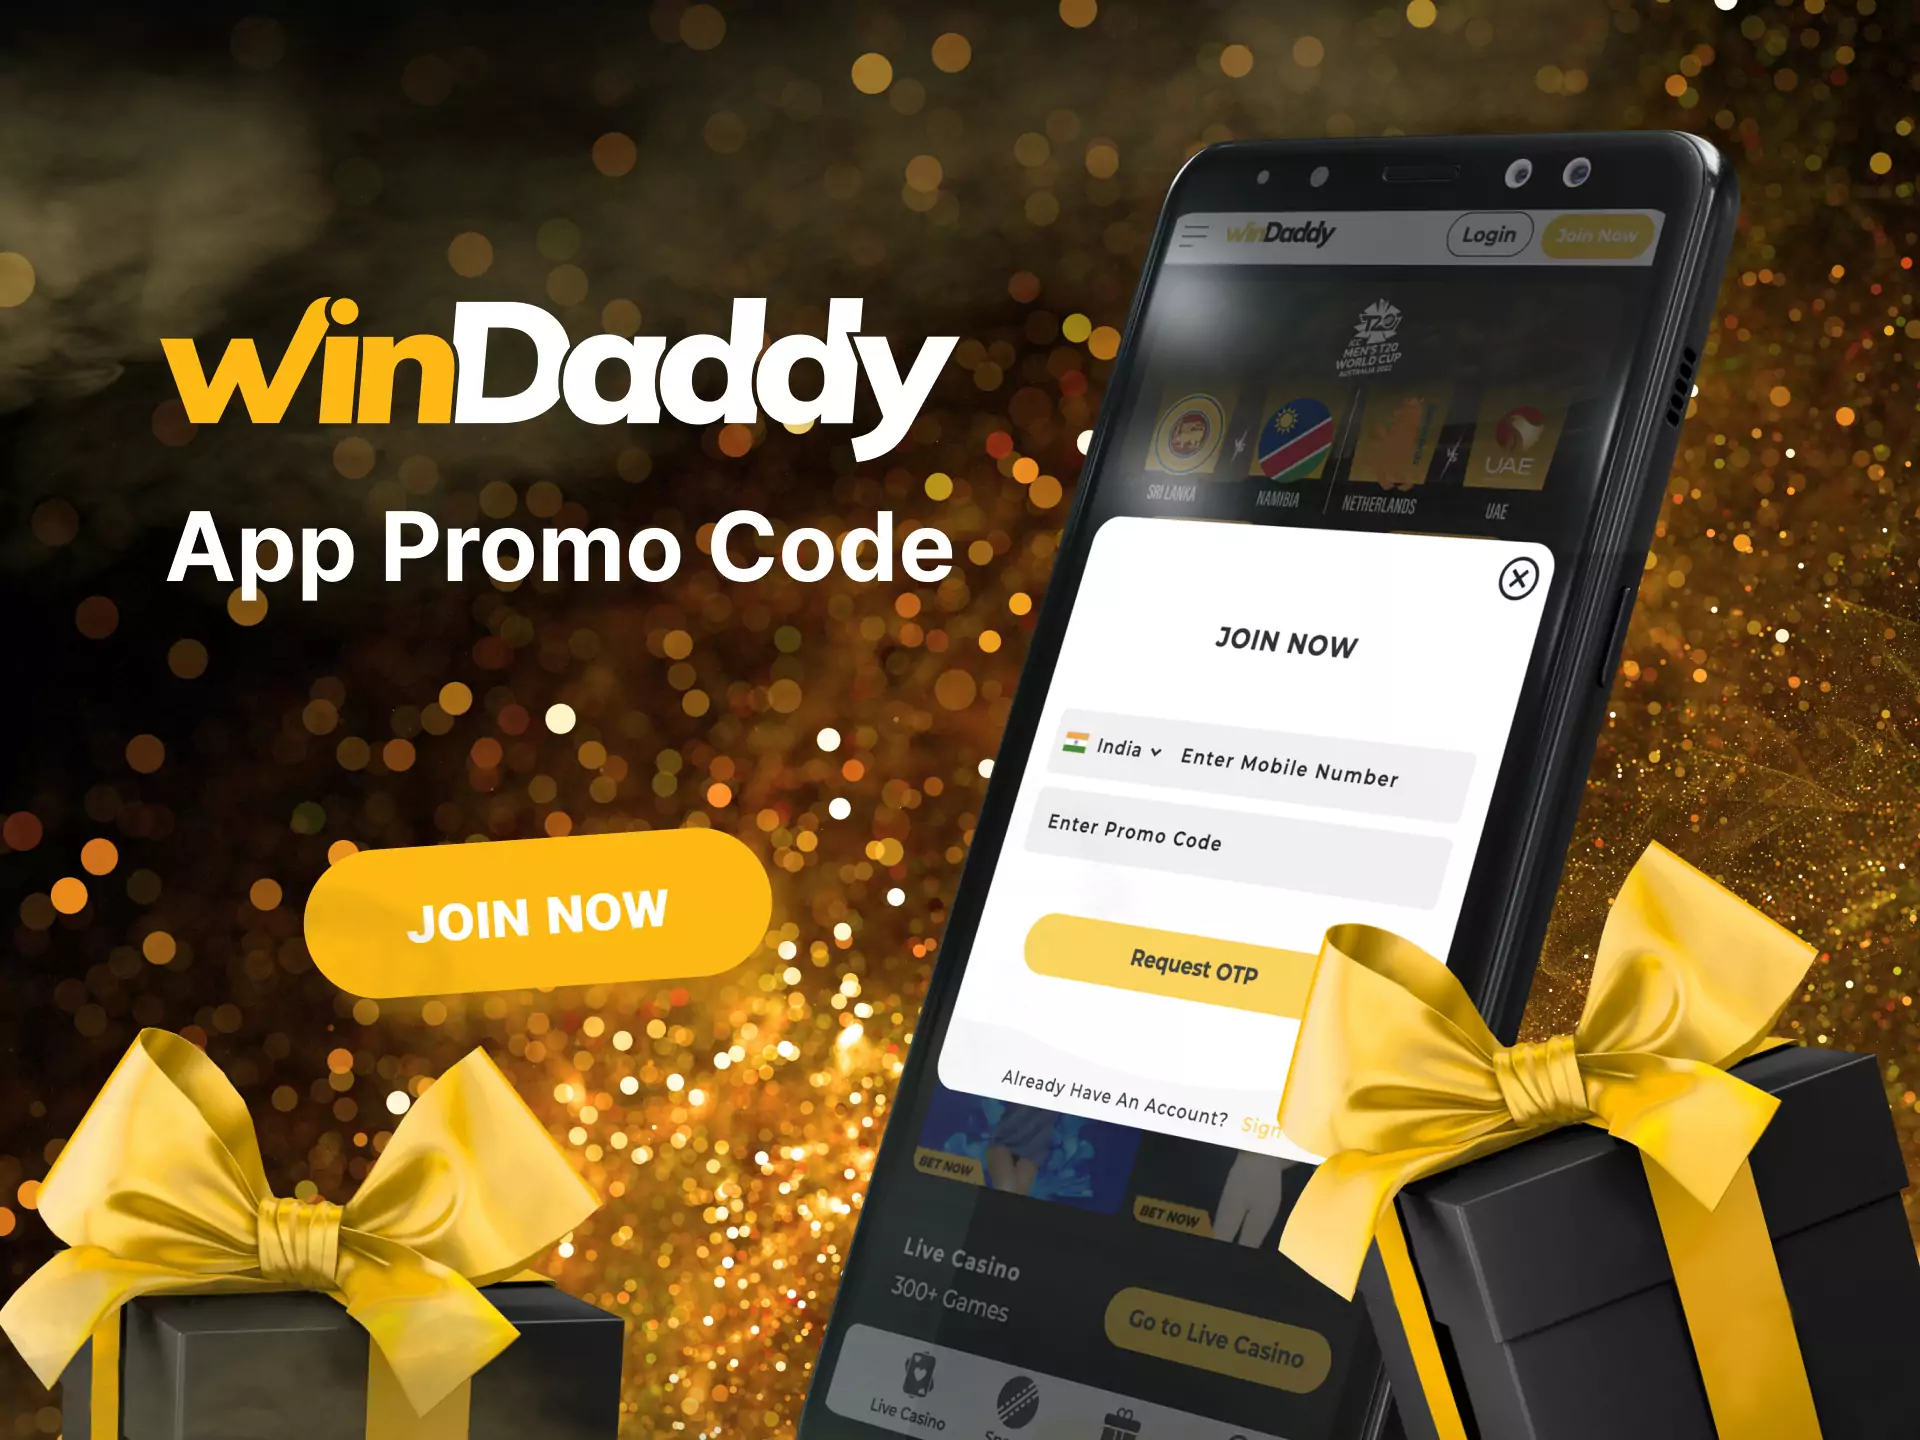 Enter the special promo code Windaddy during registration and get a bonus.